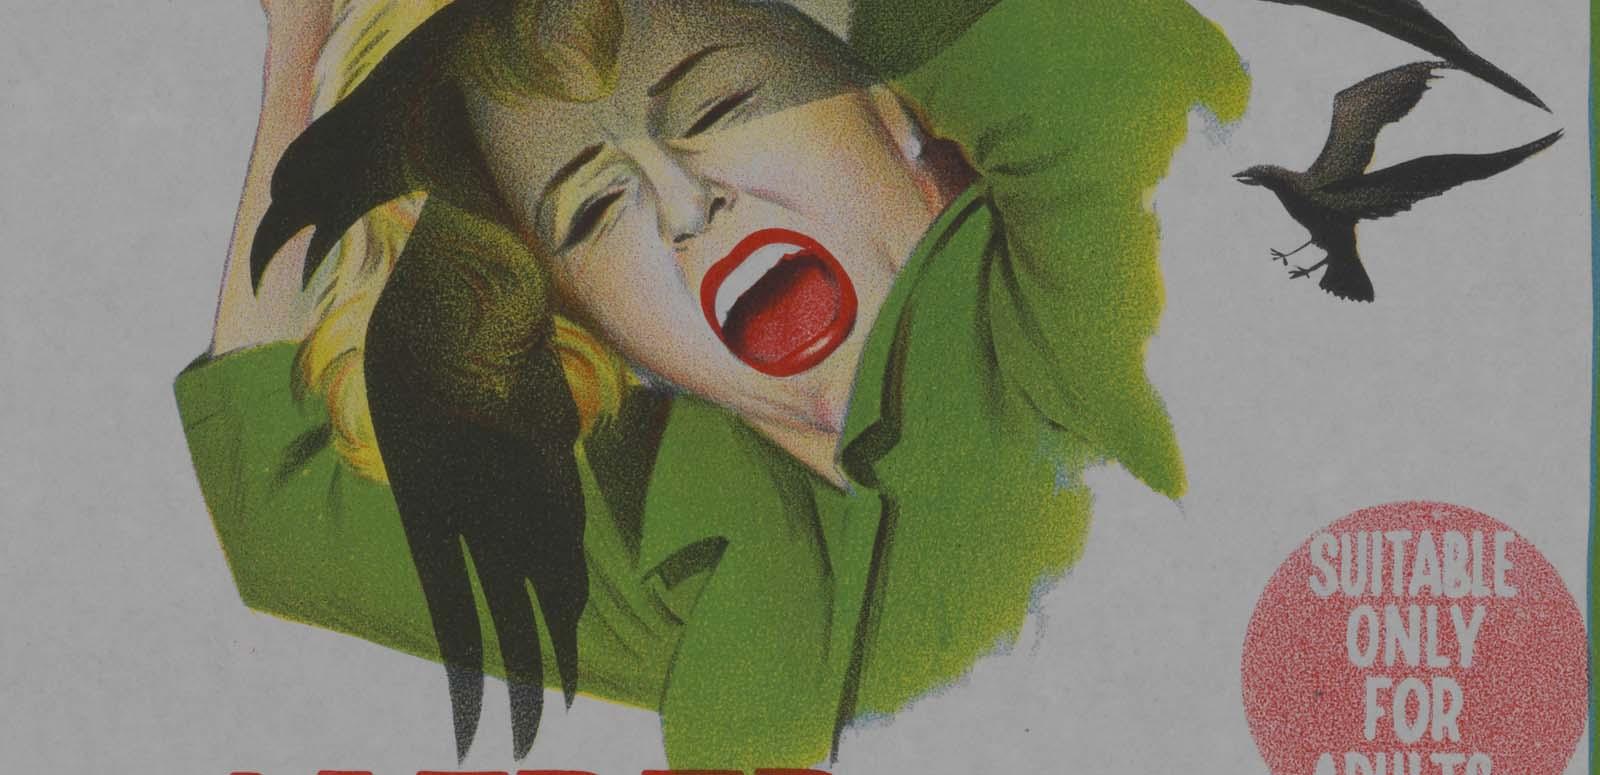 Detail from a film poster of The Birds, with an illustration of a woman screaming and covering her head while being menaced by crows